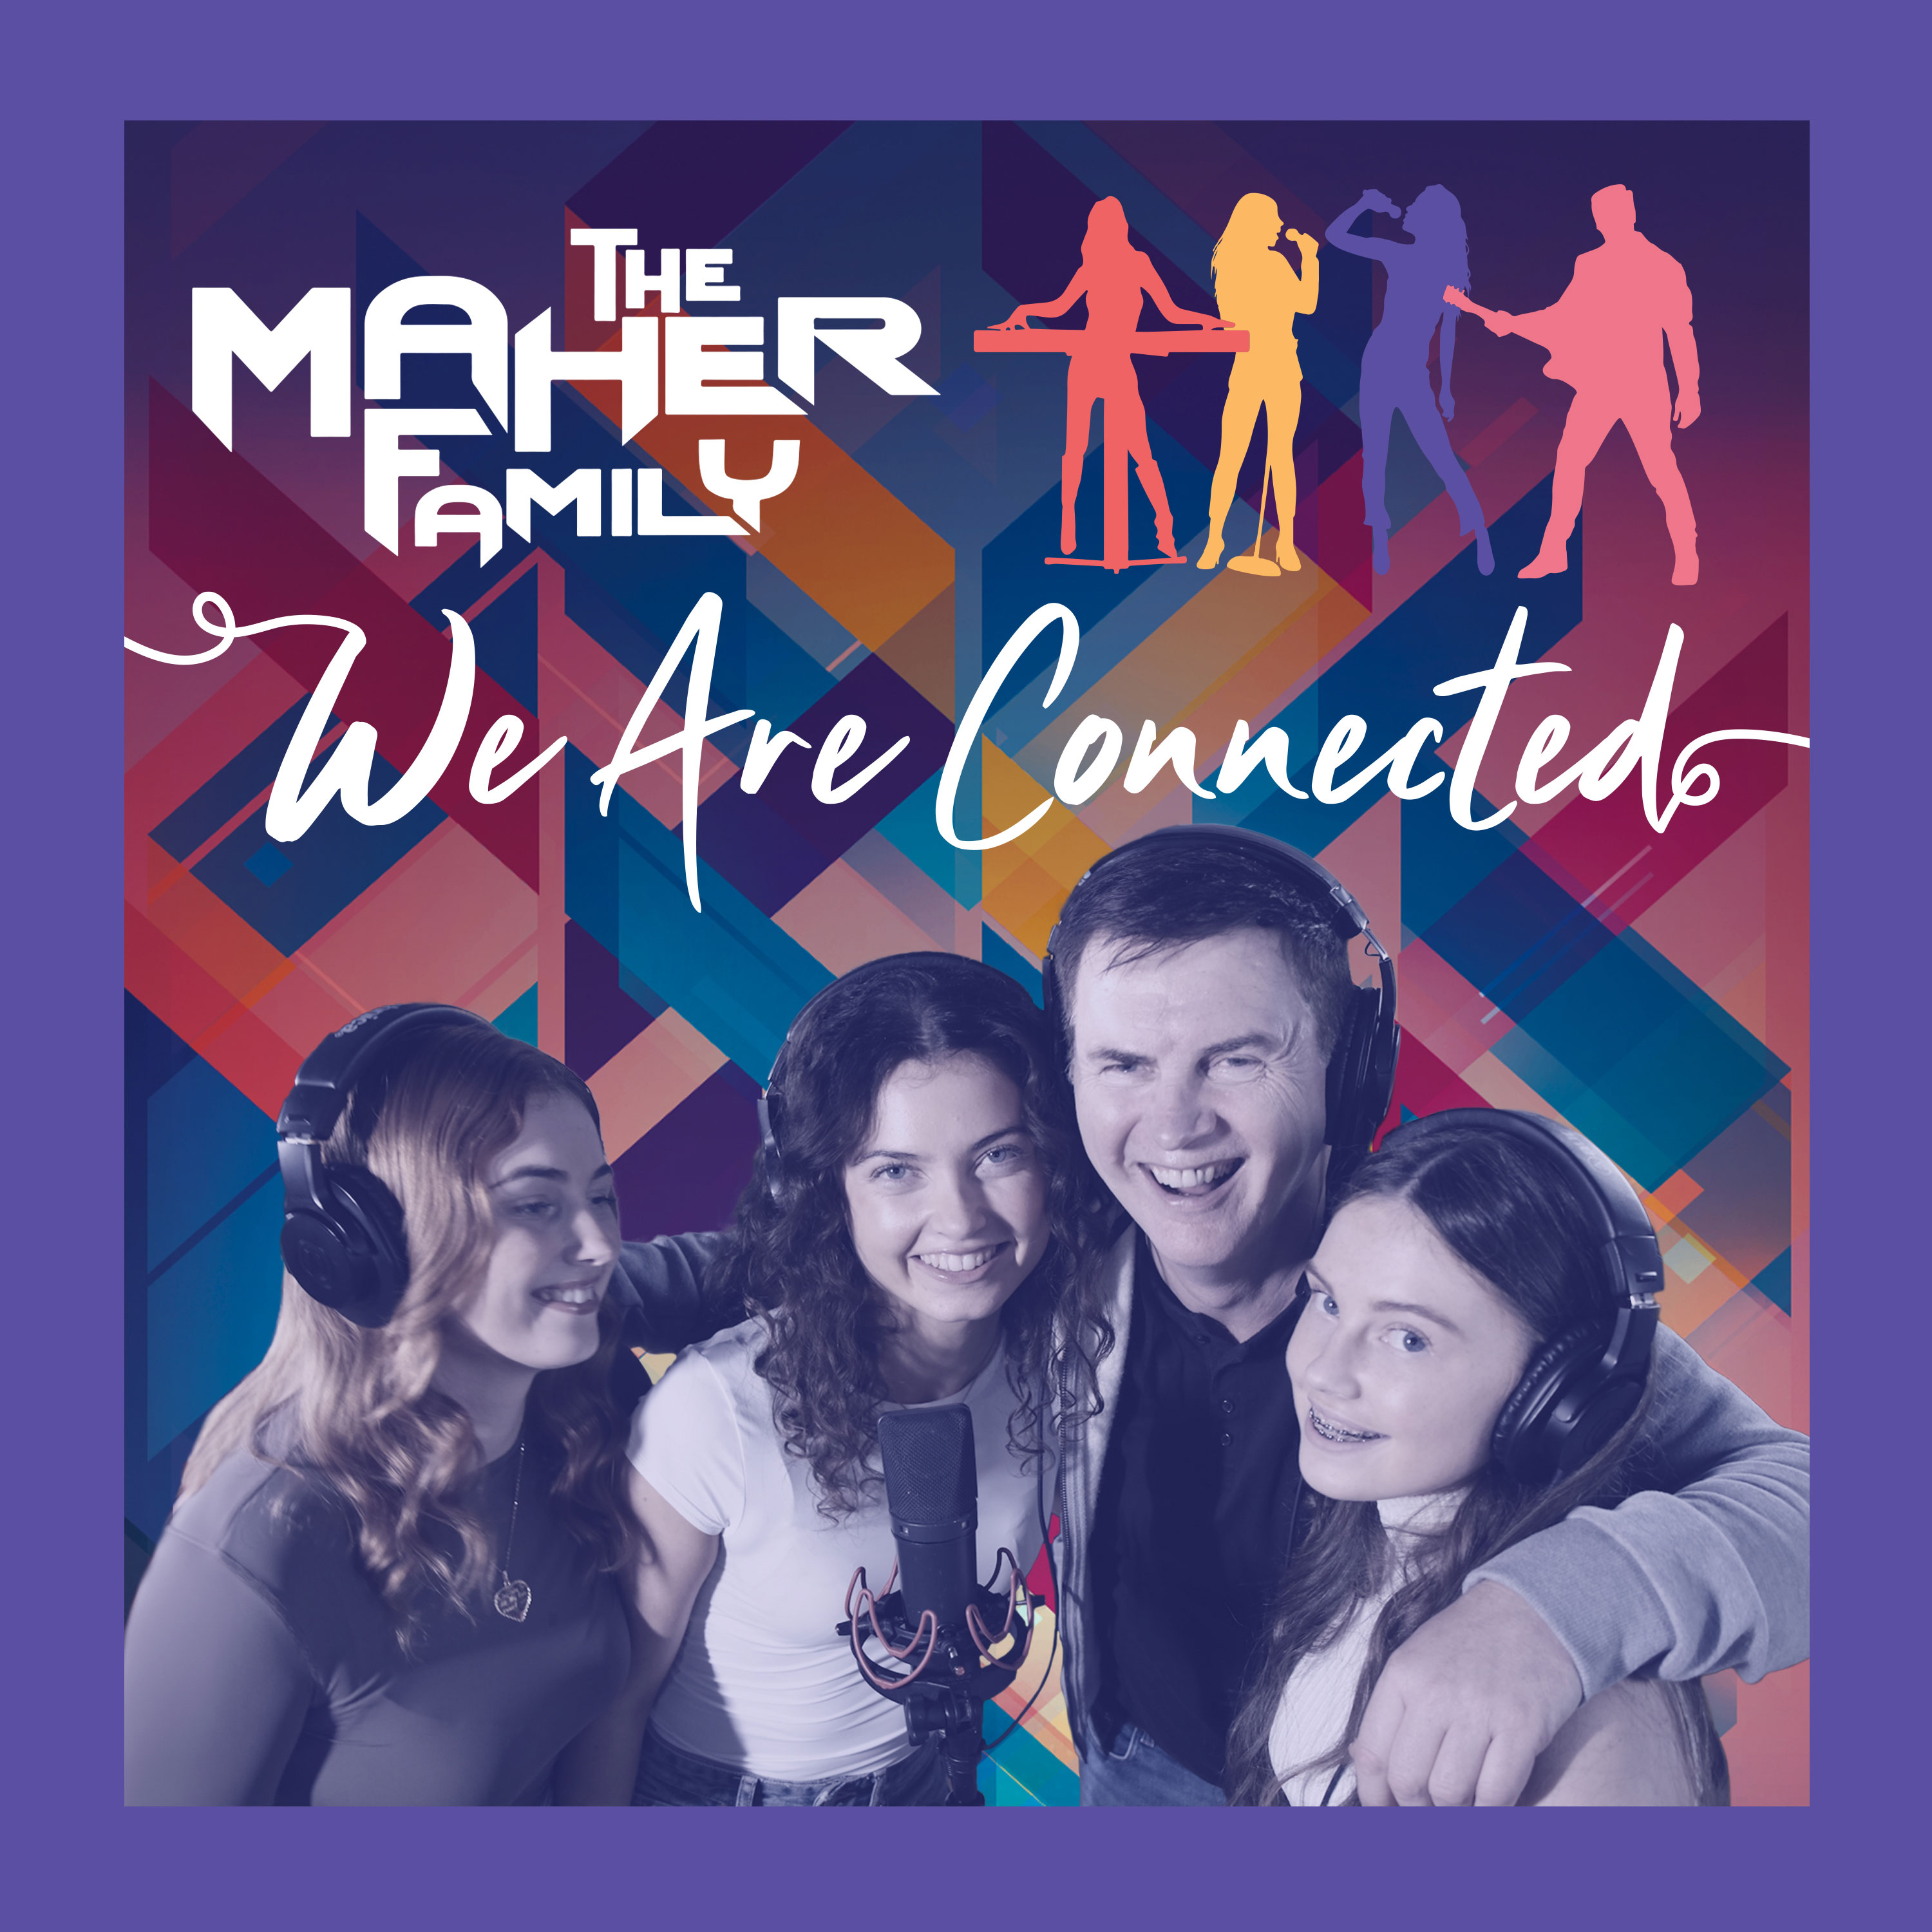 The Maher Family Cd cover